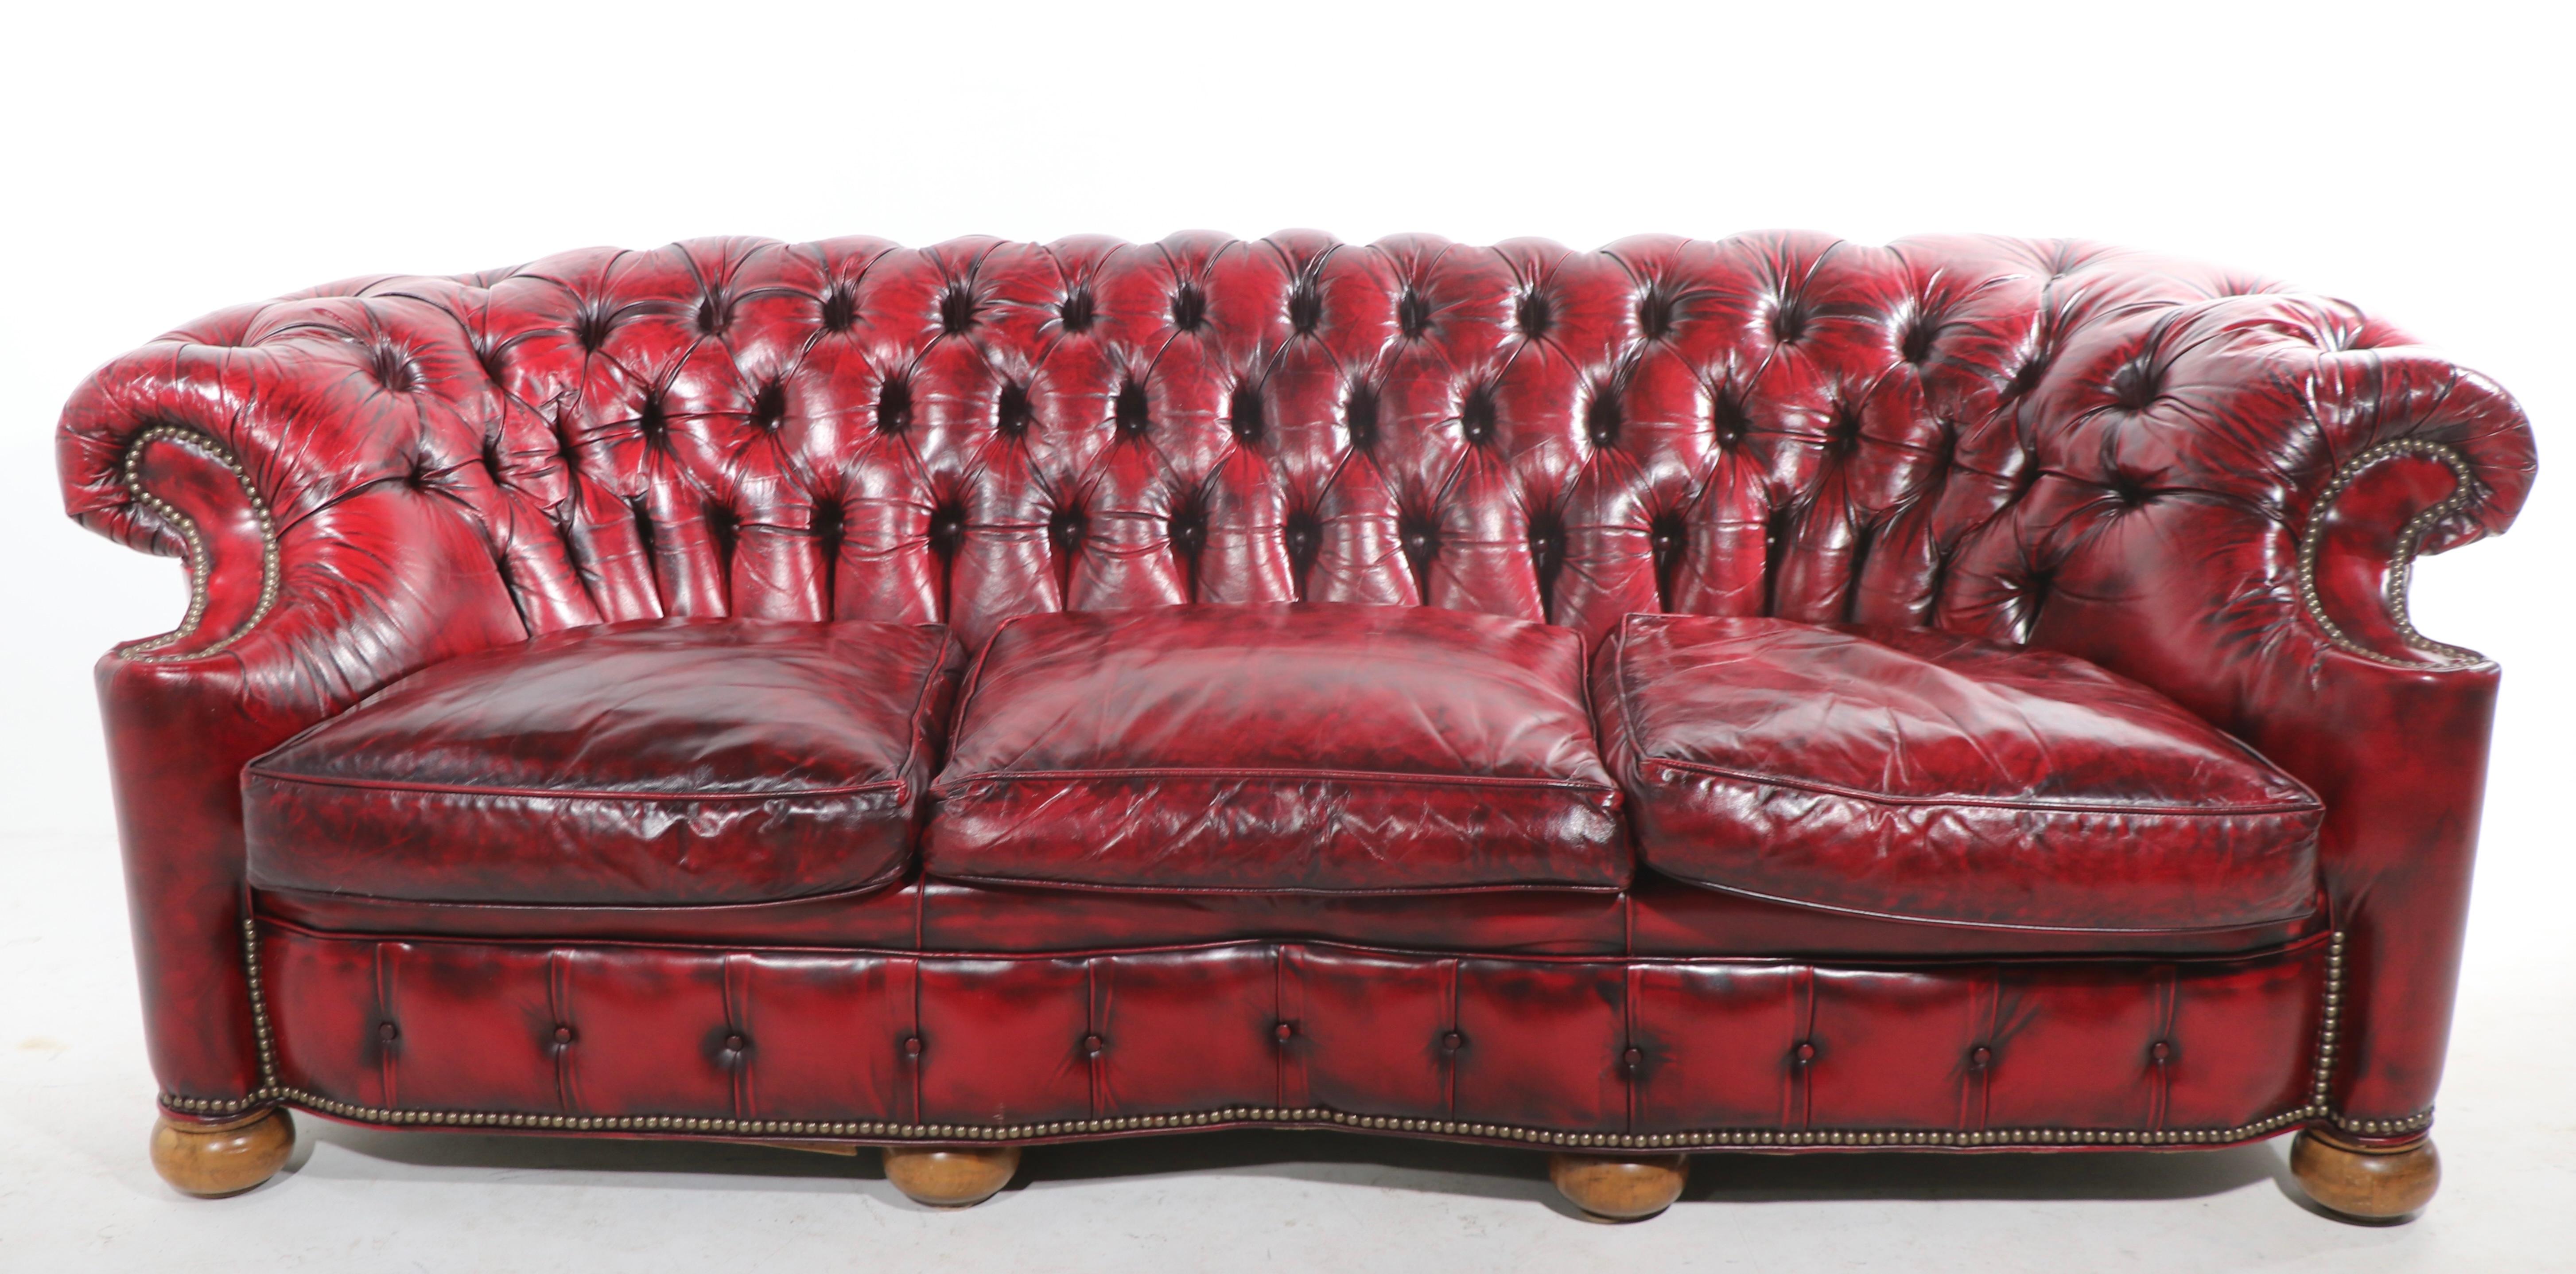 20th Century Pr. C Shape Tufted Leather Chesterfield Sofas